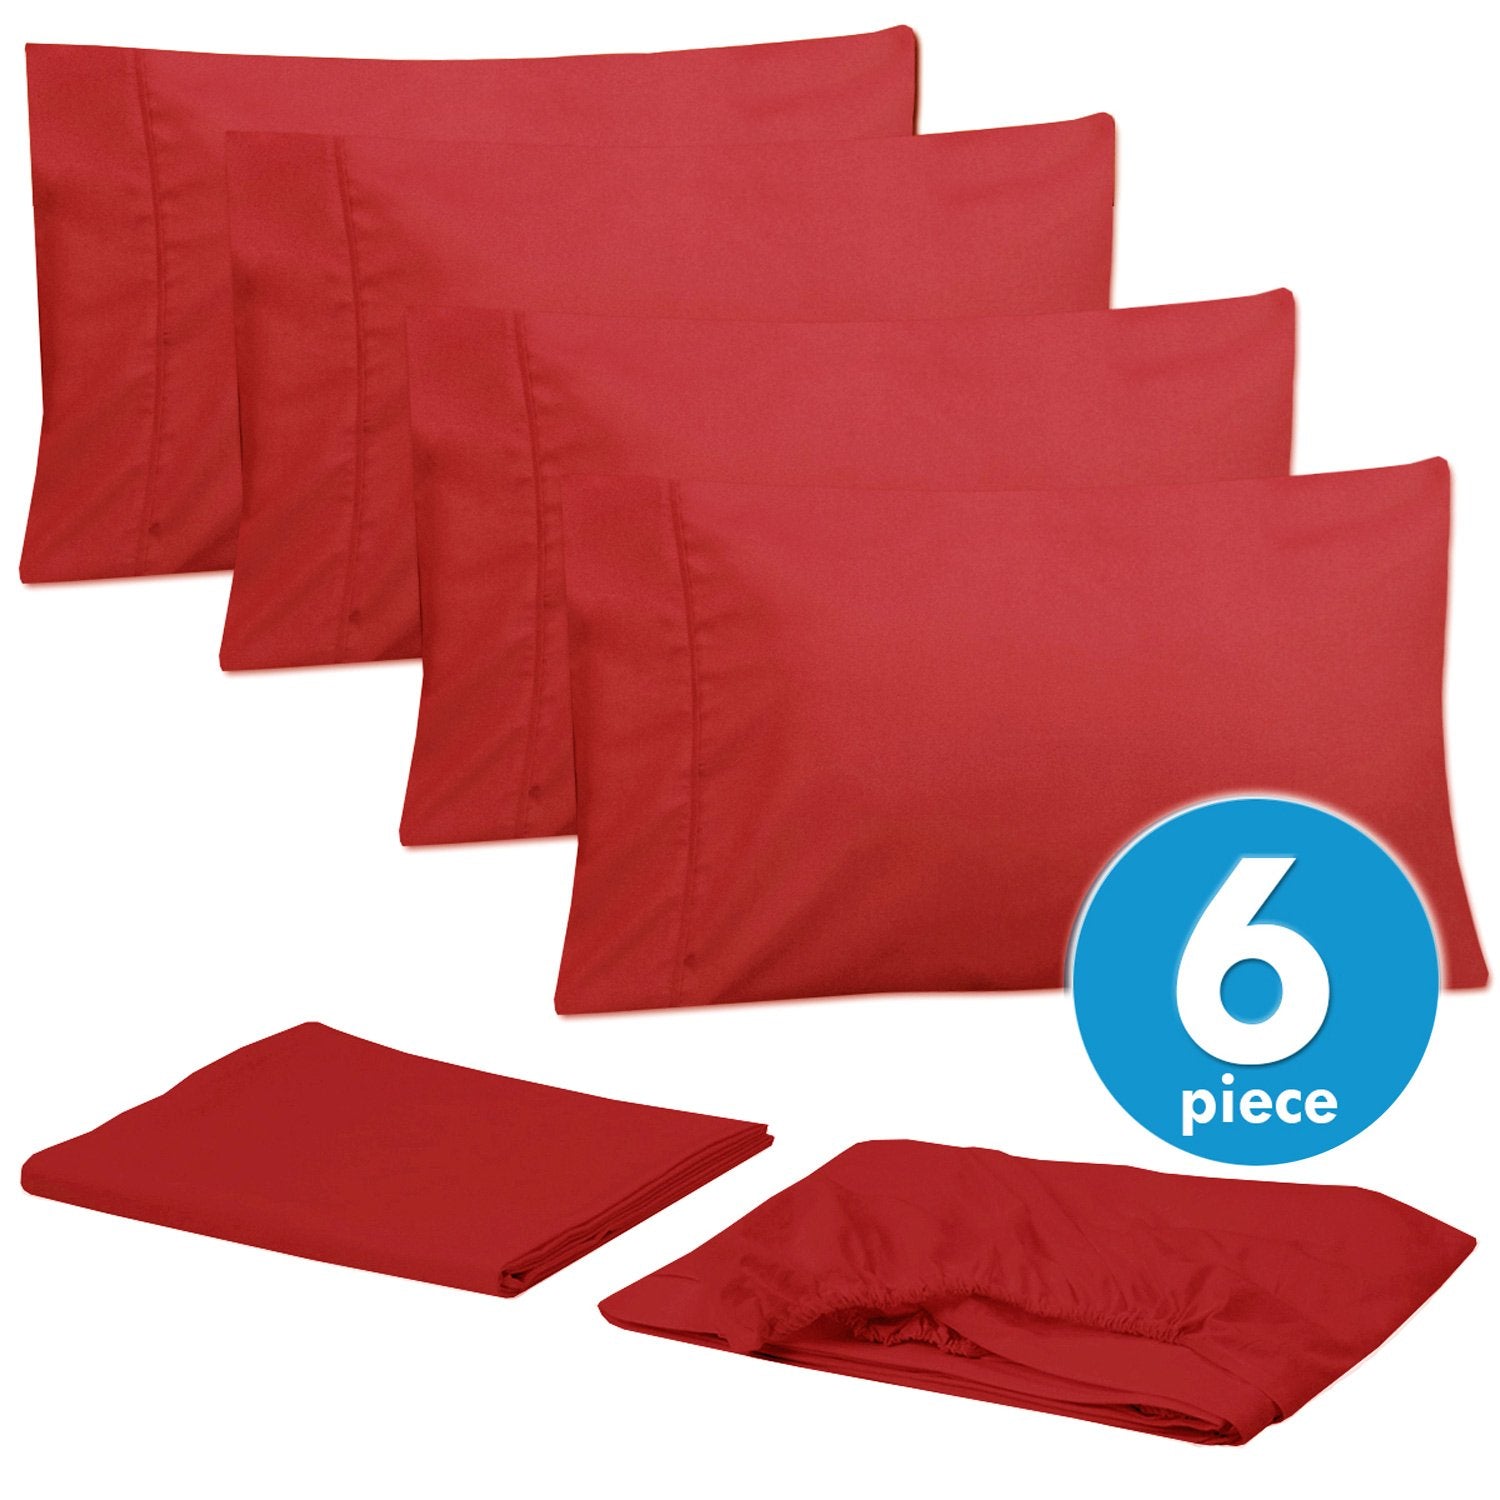 Deluxe 6-Piece Bed Sheet Set (Red) - Set